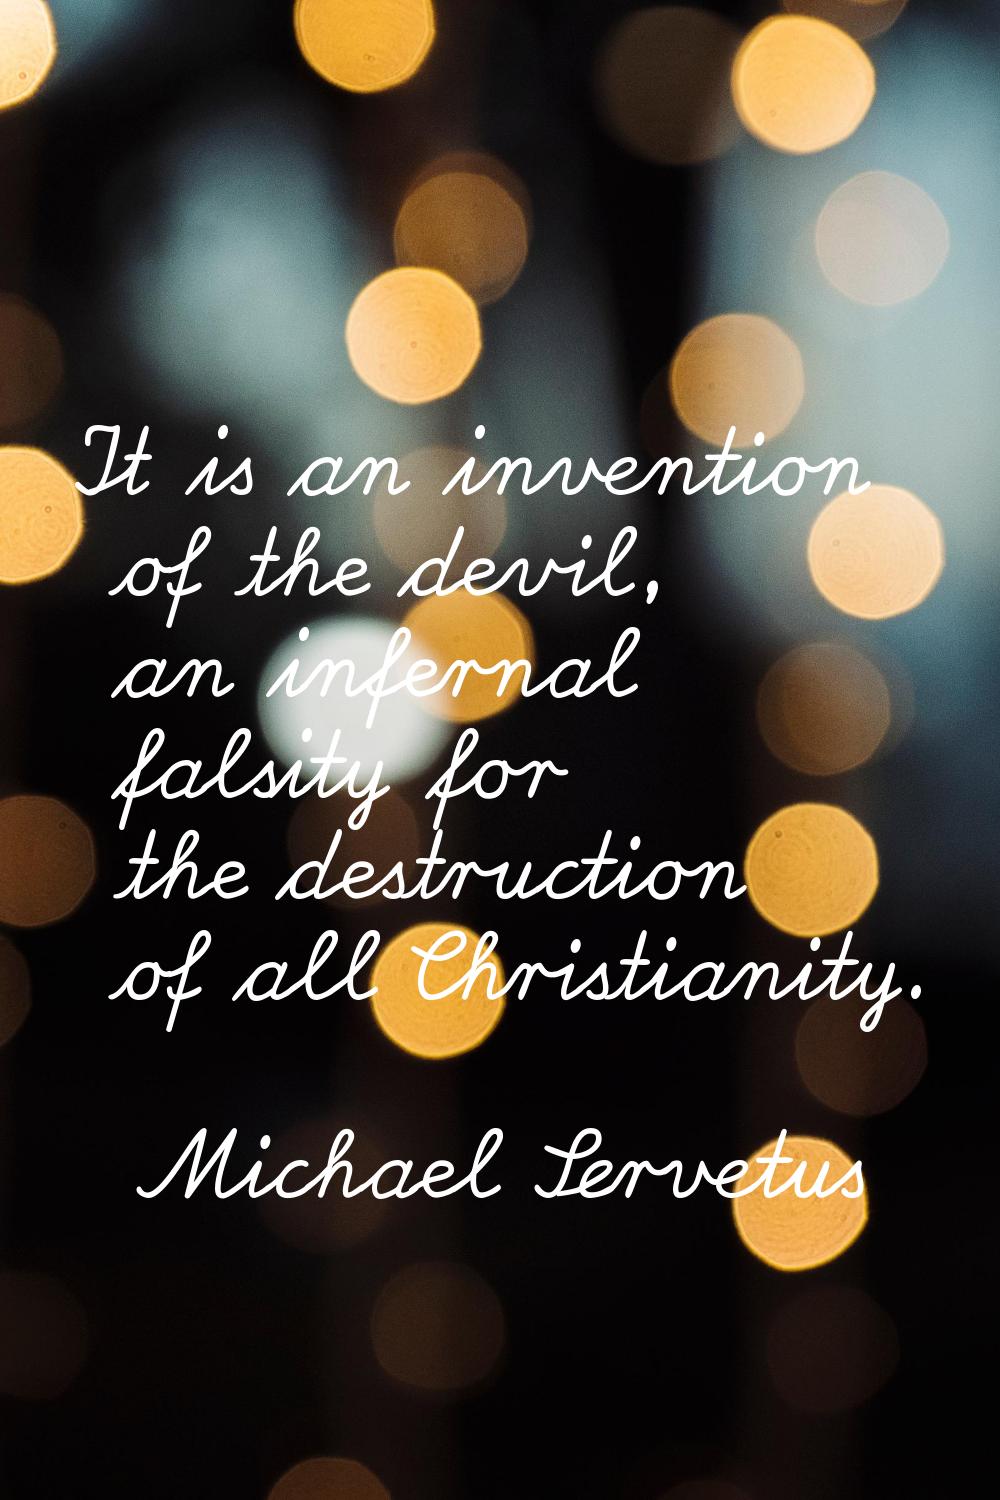 It is an invention of the devil, an infernal falsity for the destruction of all Christianity.